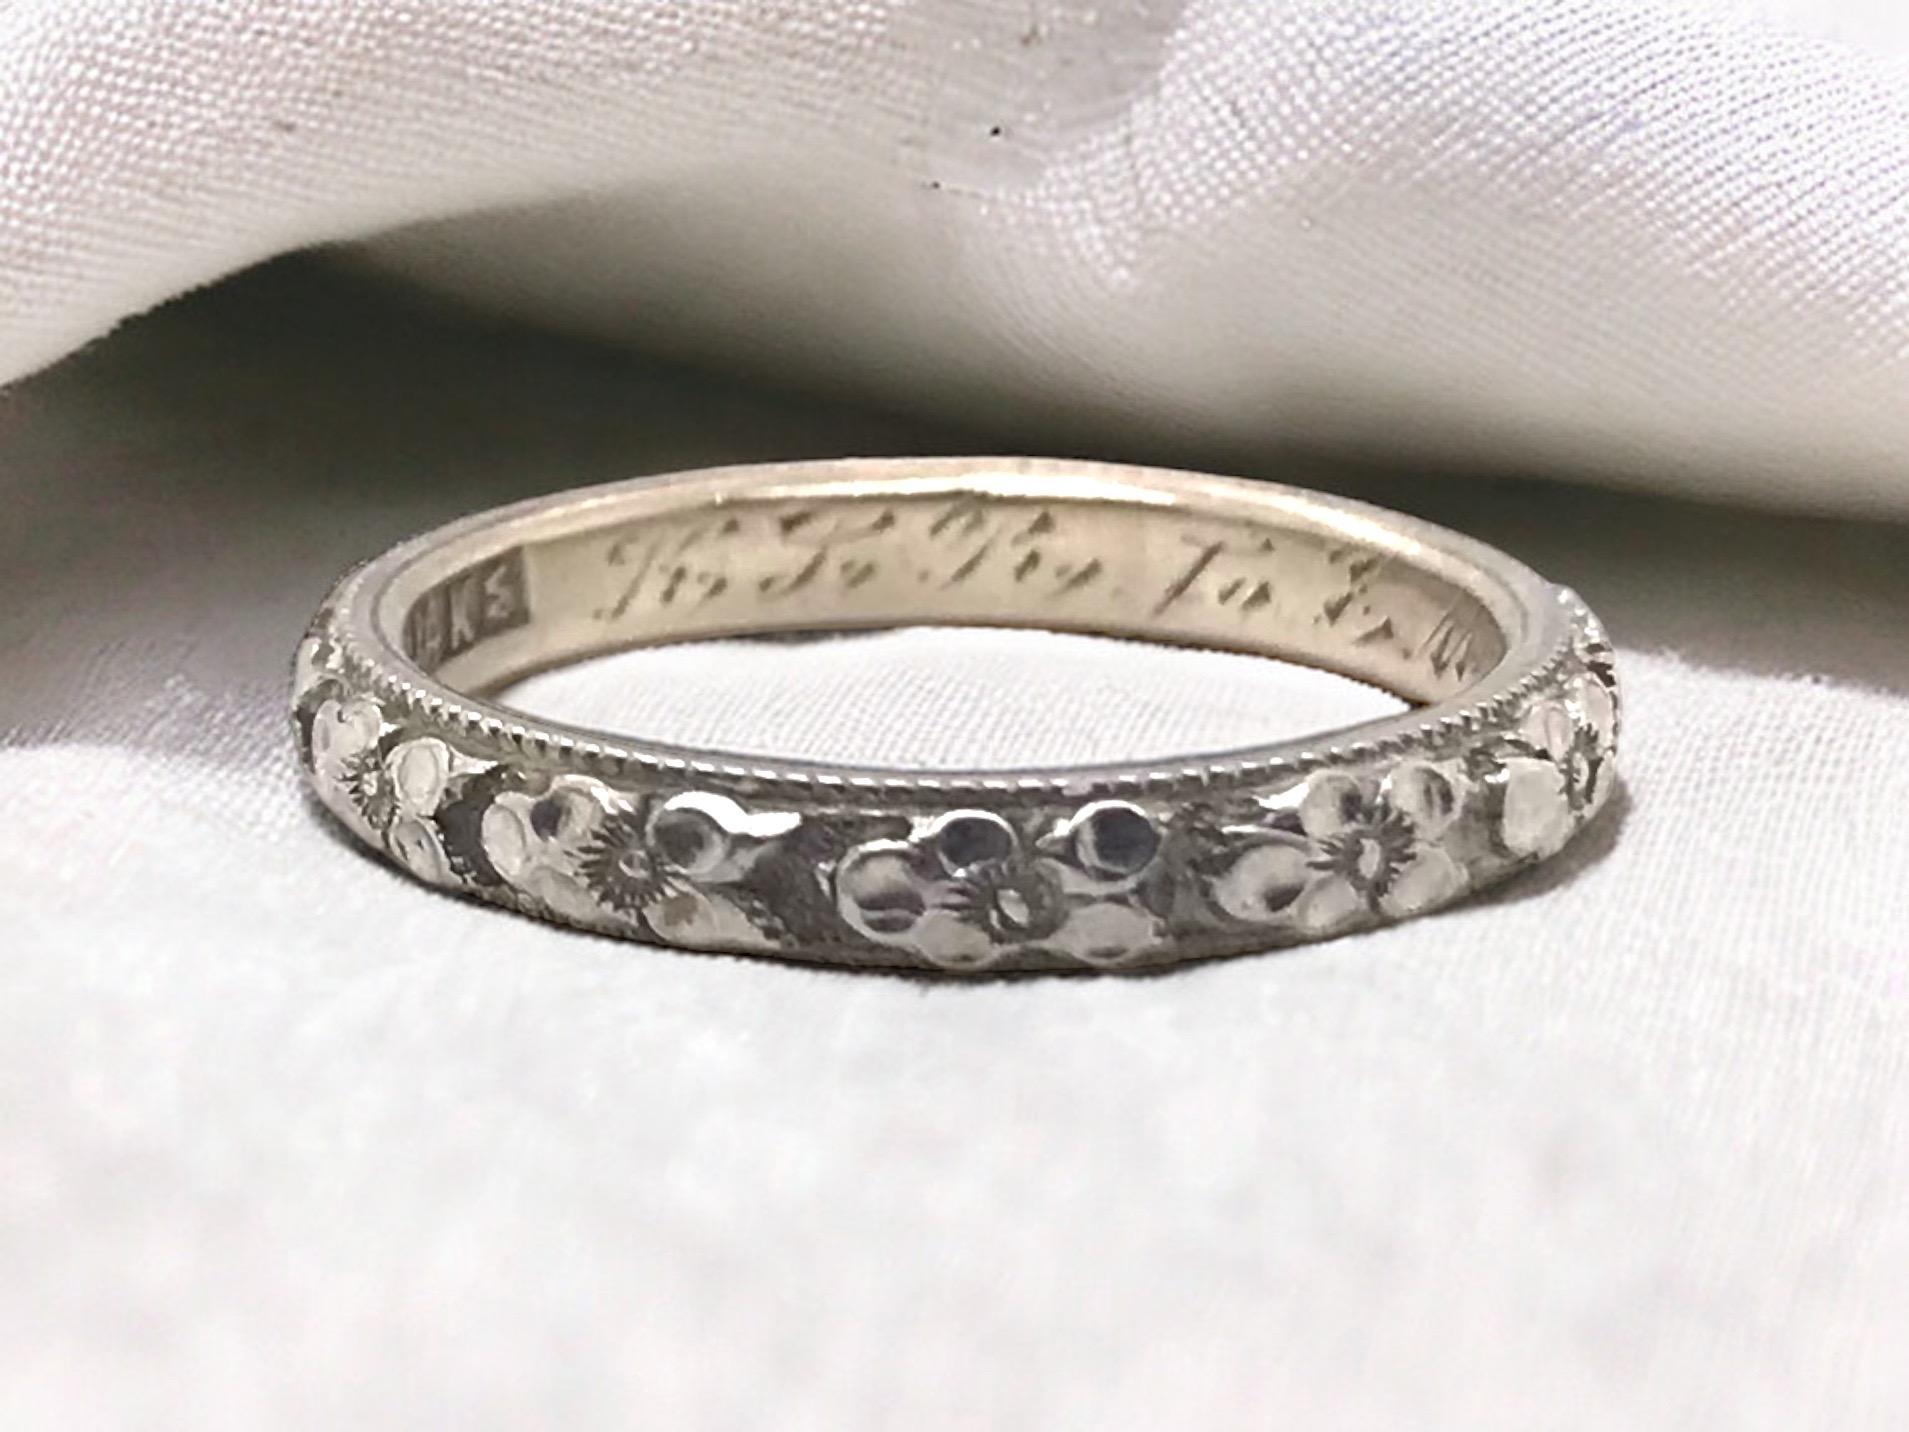 Lovely piece of vintage history!
Engraved Inside: R.J.W. to E.M.G

Ring Details:
Metal: Platinum
Shank Width: 2.0mm
Height: 1.44mm
Weight: 2.7 Grams
Finger Size: 5.5
Sizing Options Available 

Item: 768TMV3